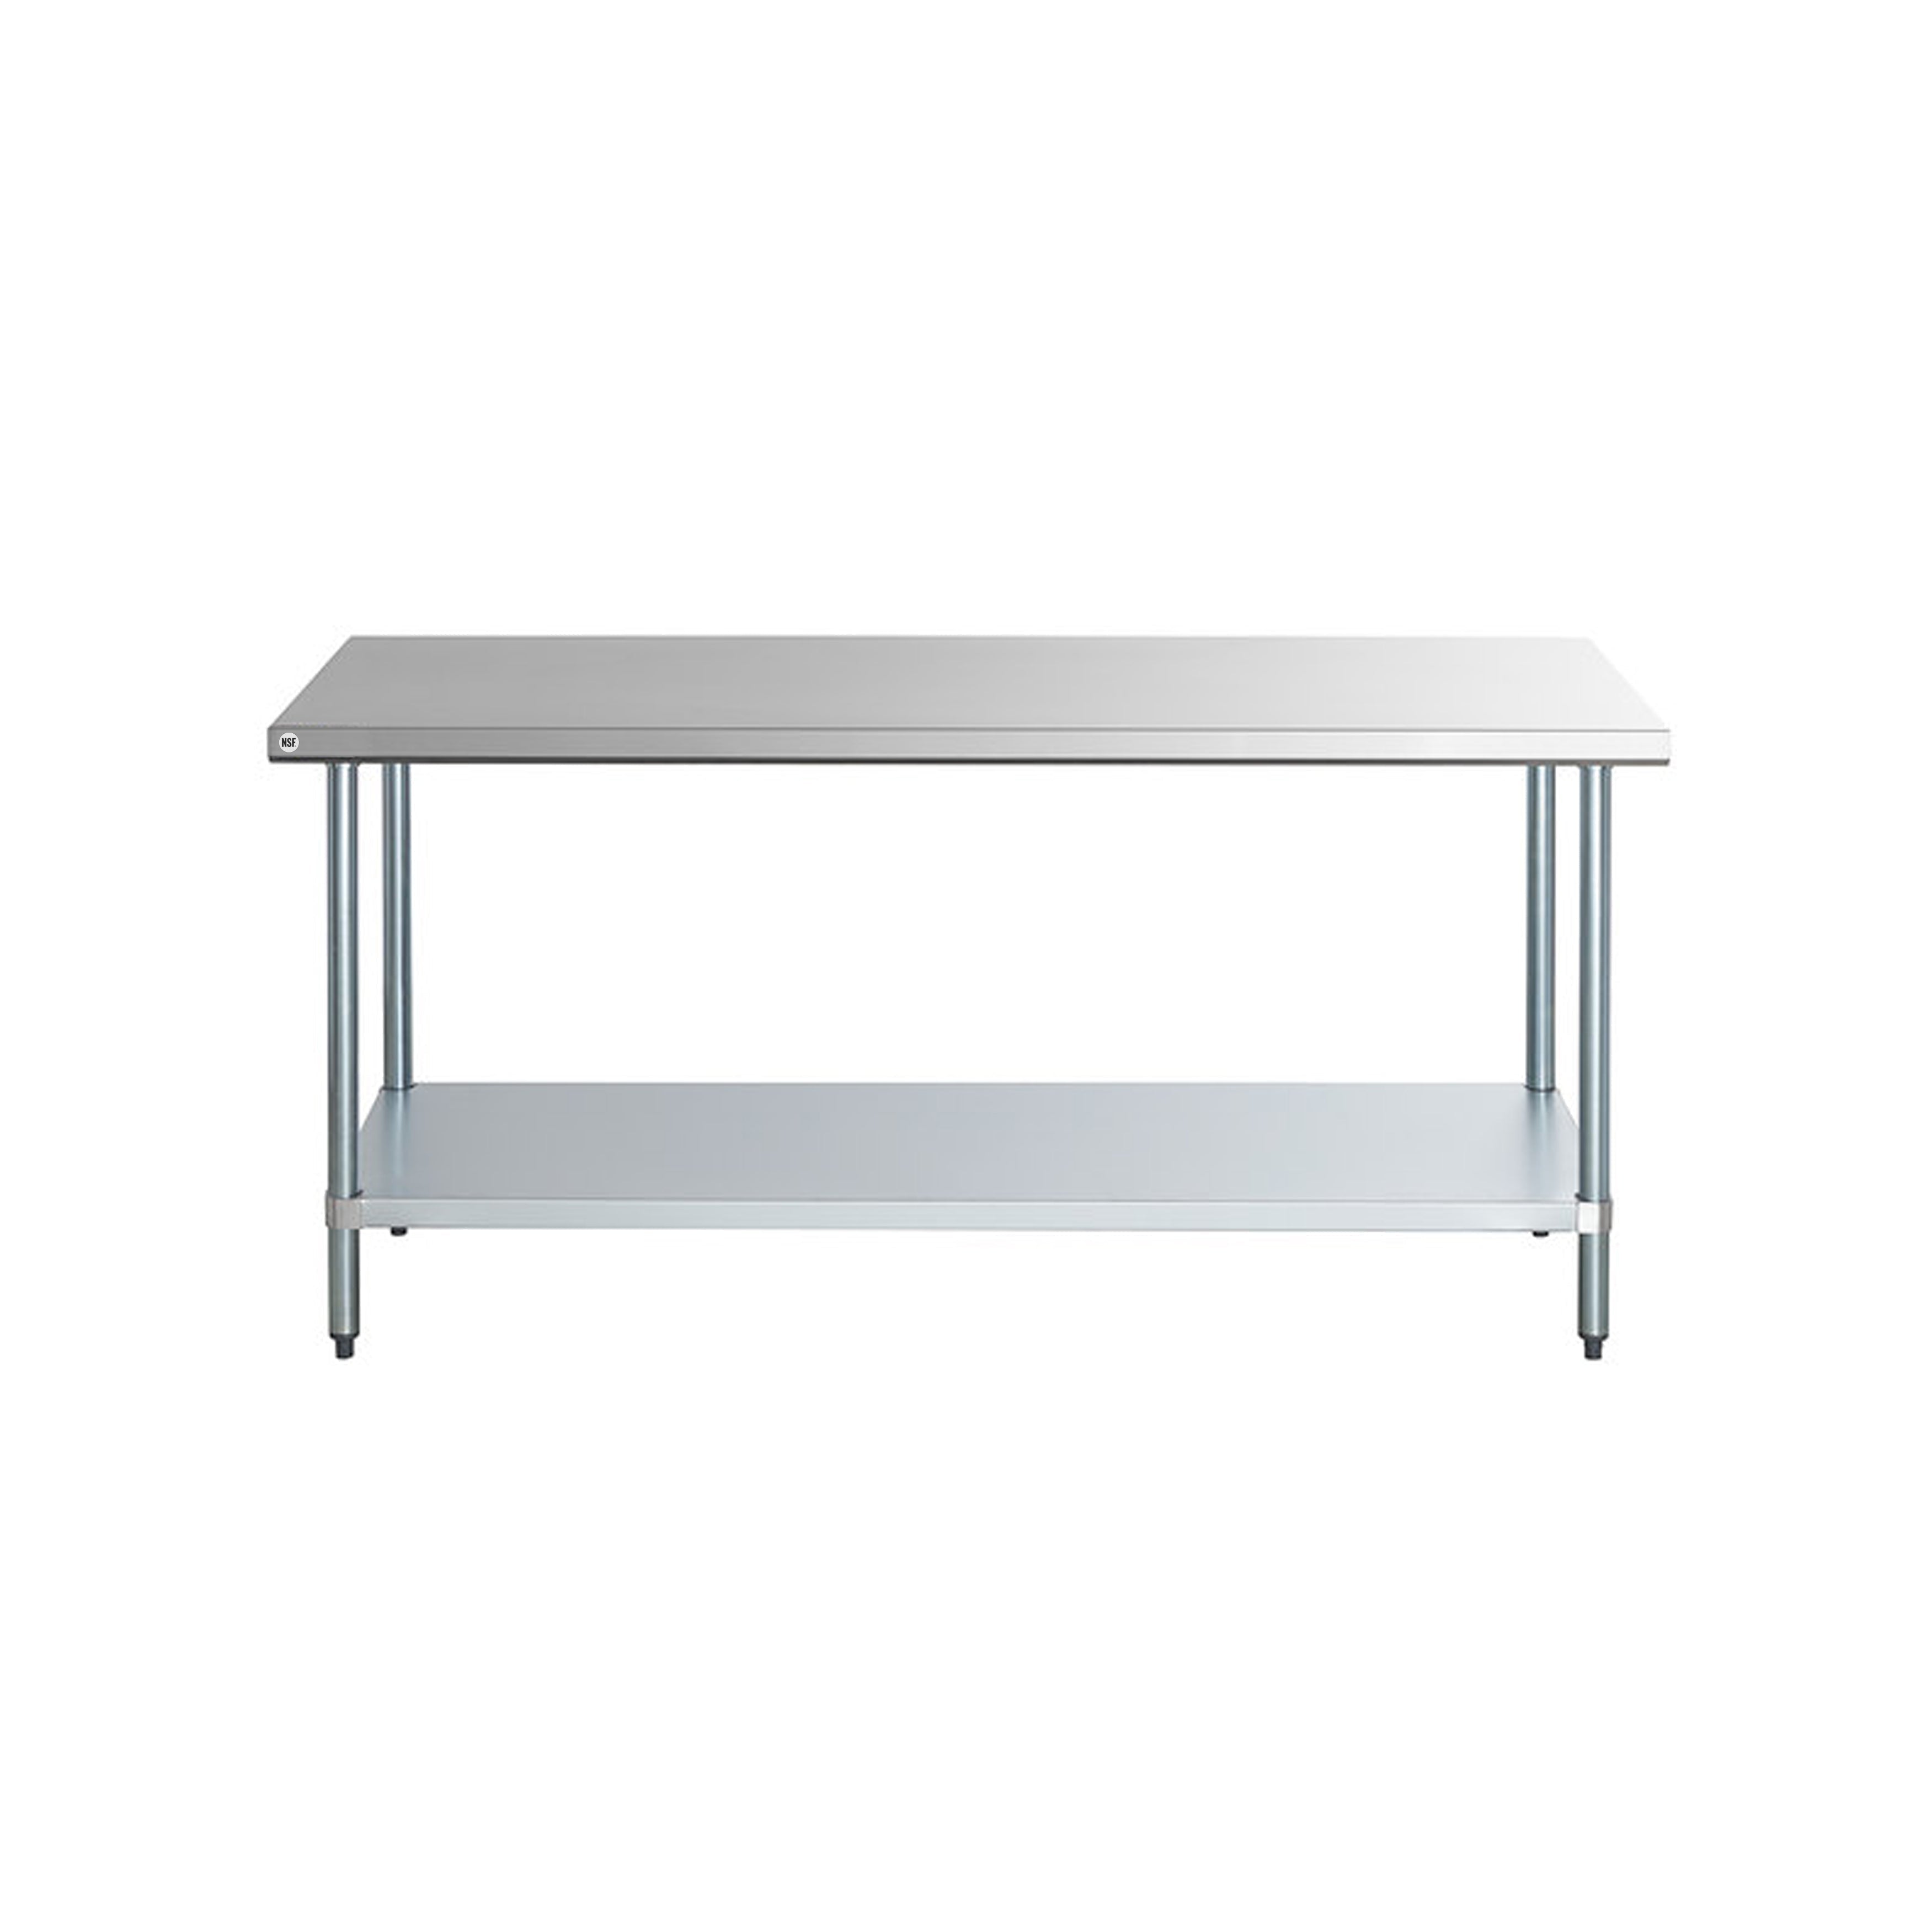 Omcan - 20434, Commercial 84" x 30" Stainless Steel Kitchen Work Table 1600lbs Medium Duty